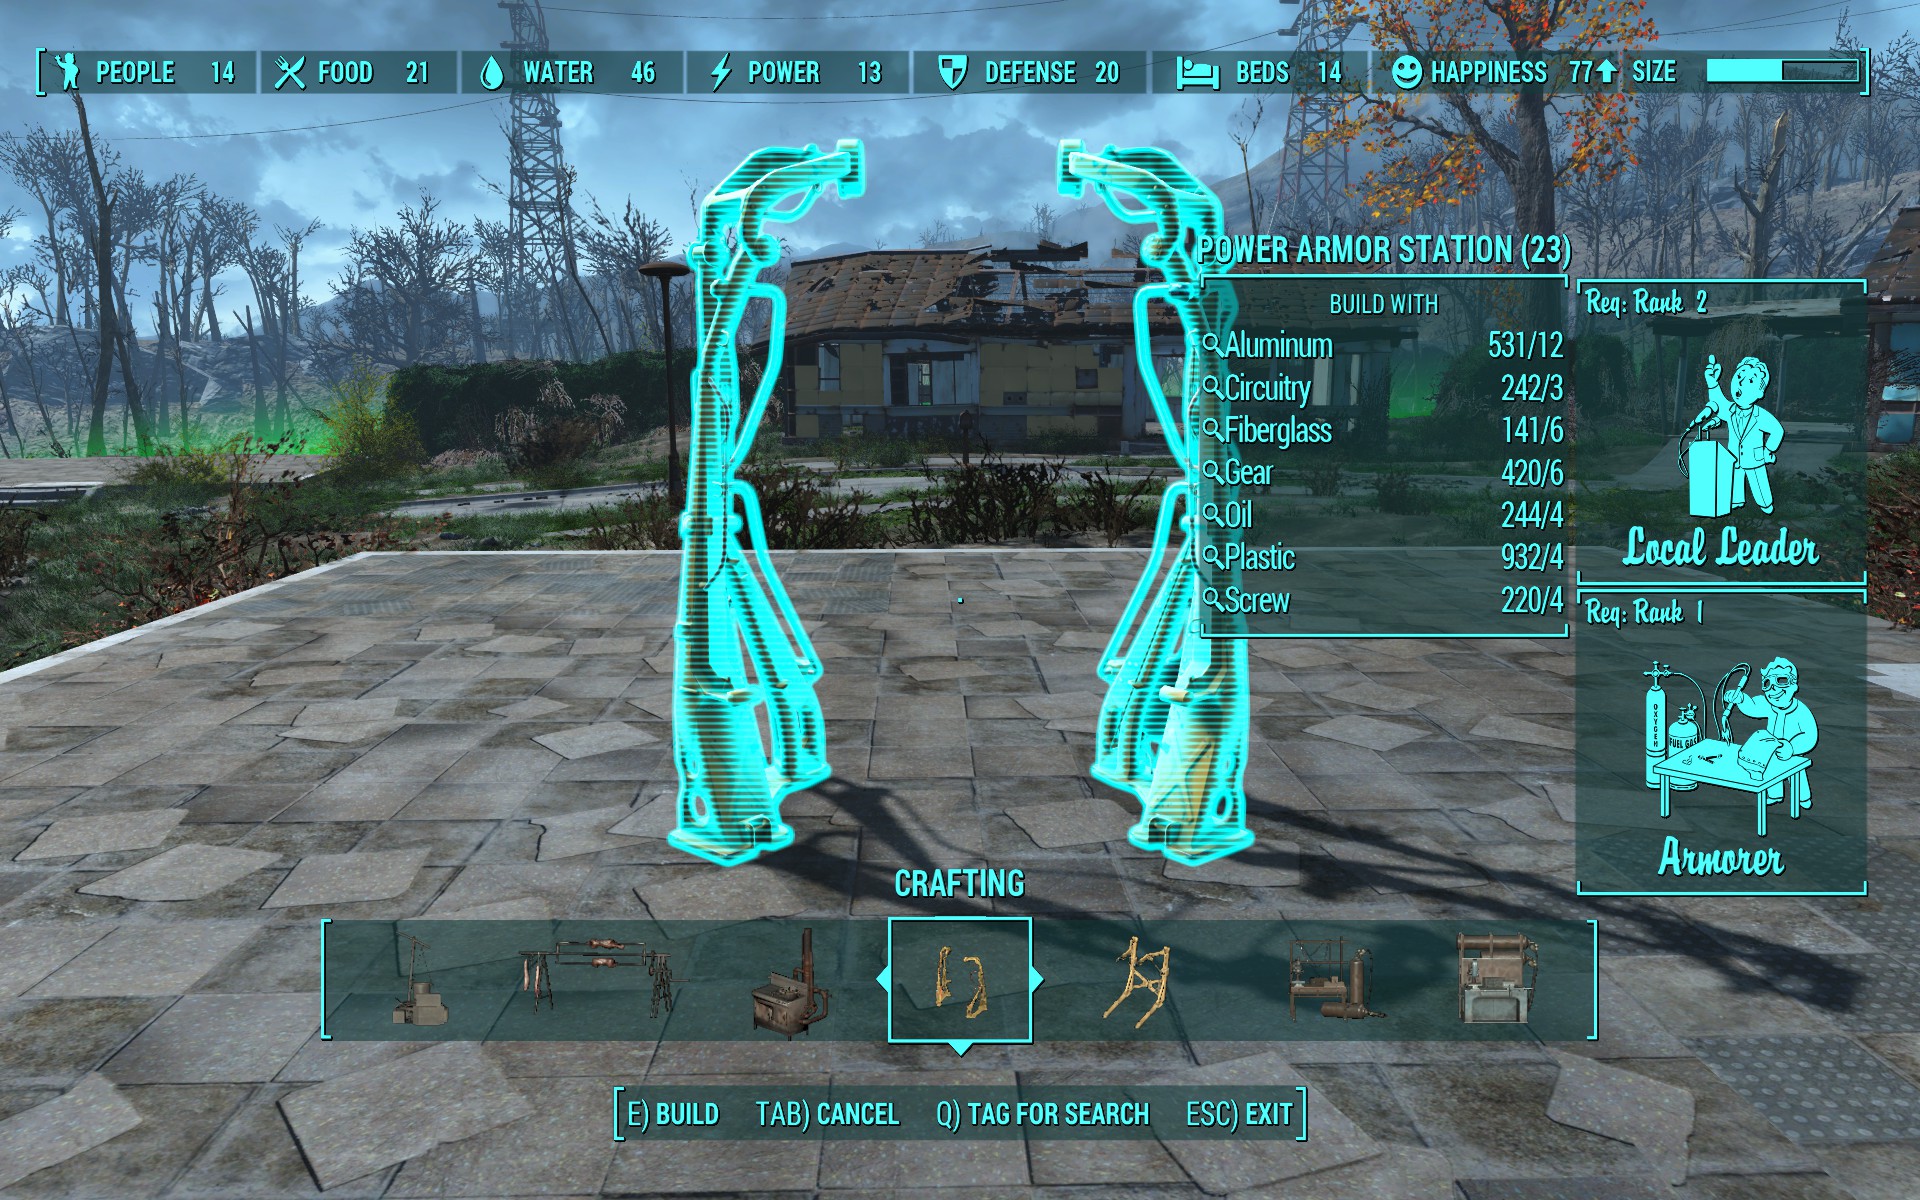 Small Power Armor Station Fallout 4 / FO4 mods